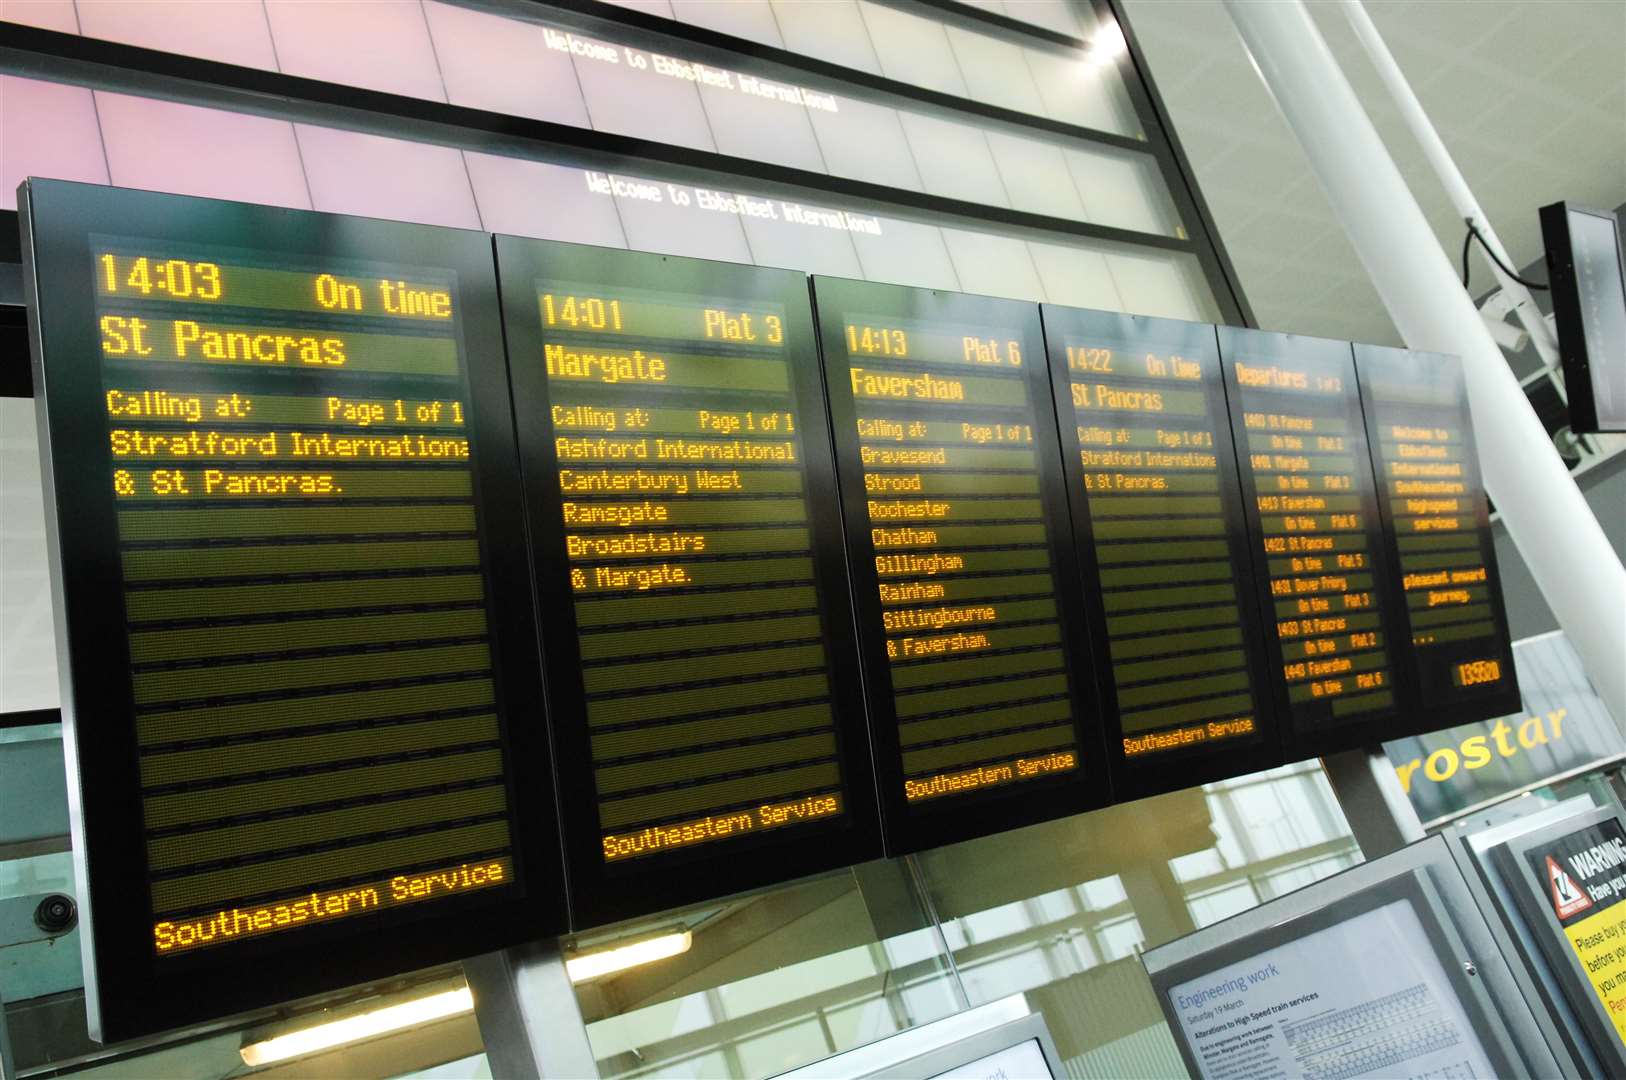 Ebbsfleet International is just one of many stations in Kent which will be displaying the messages